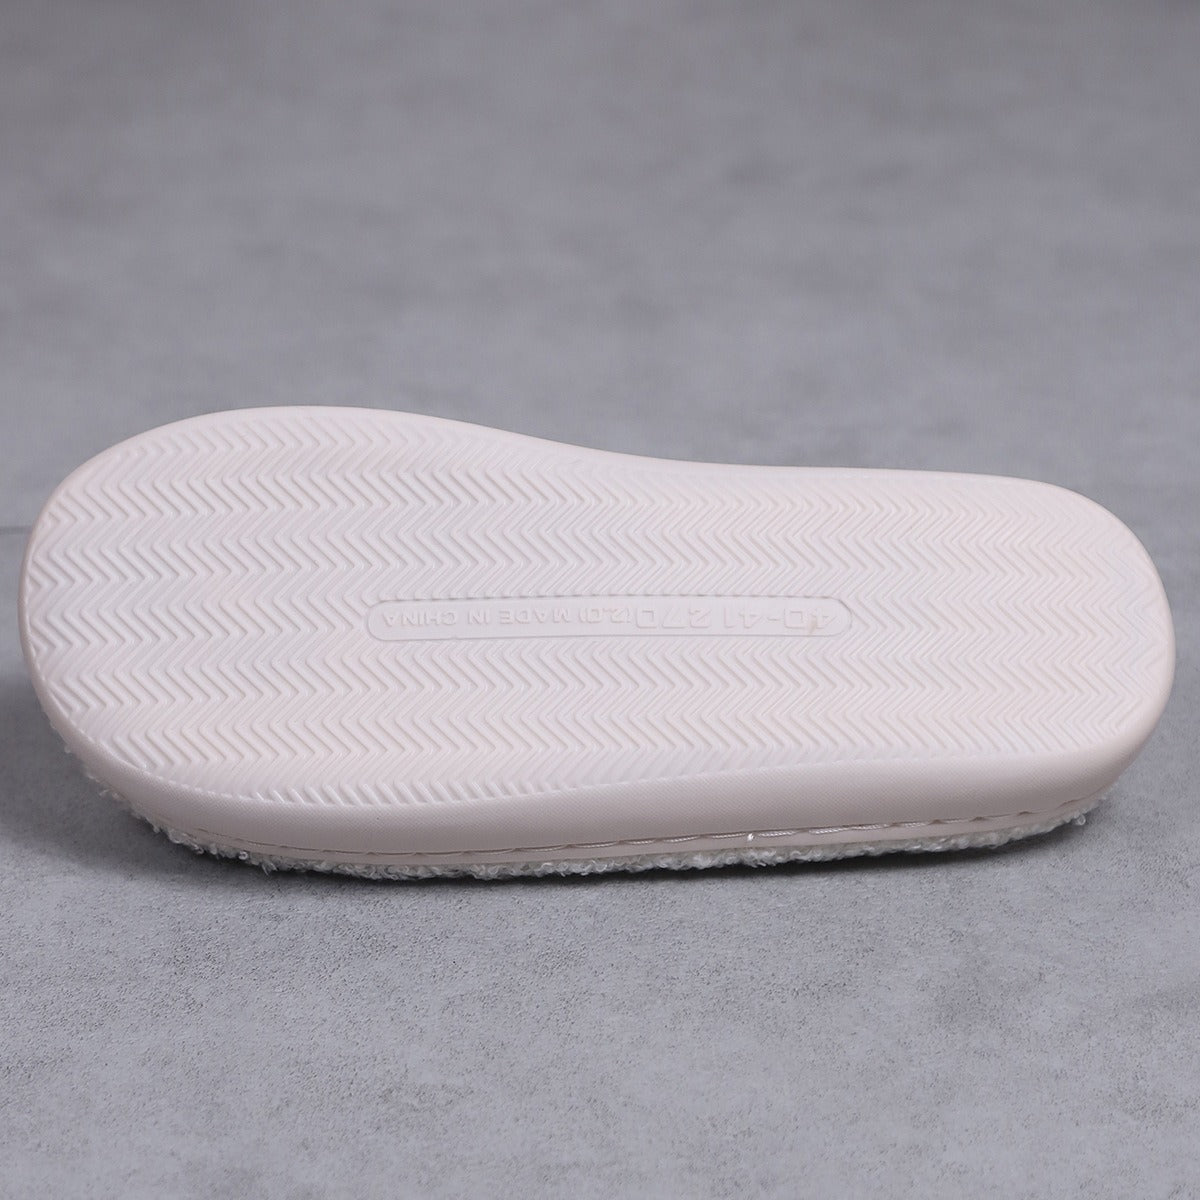 Warm and comfortable winter cotton slippers